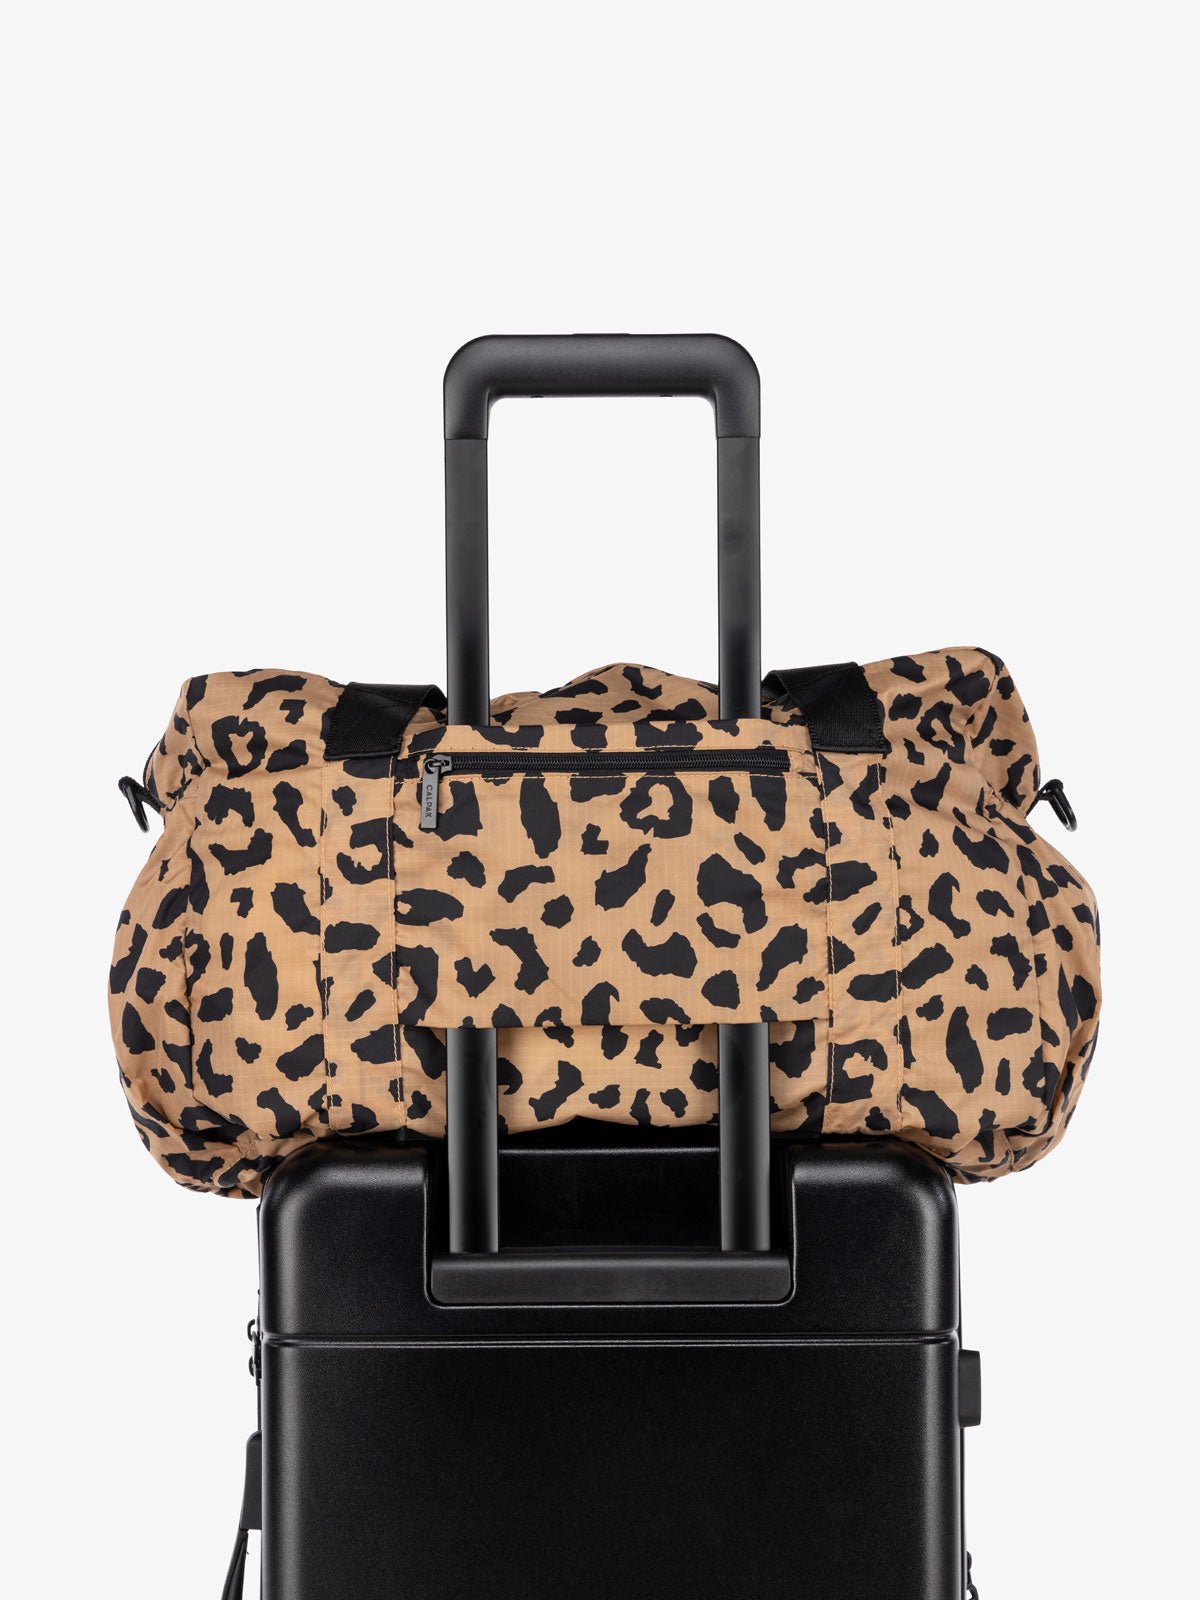 compakt duffel bag part of compakt duo with trolley luggage sleeve in cheetah print